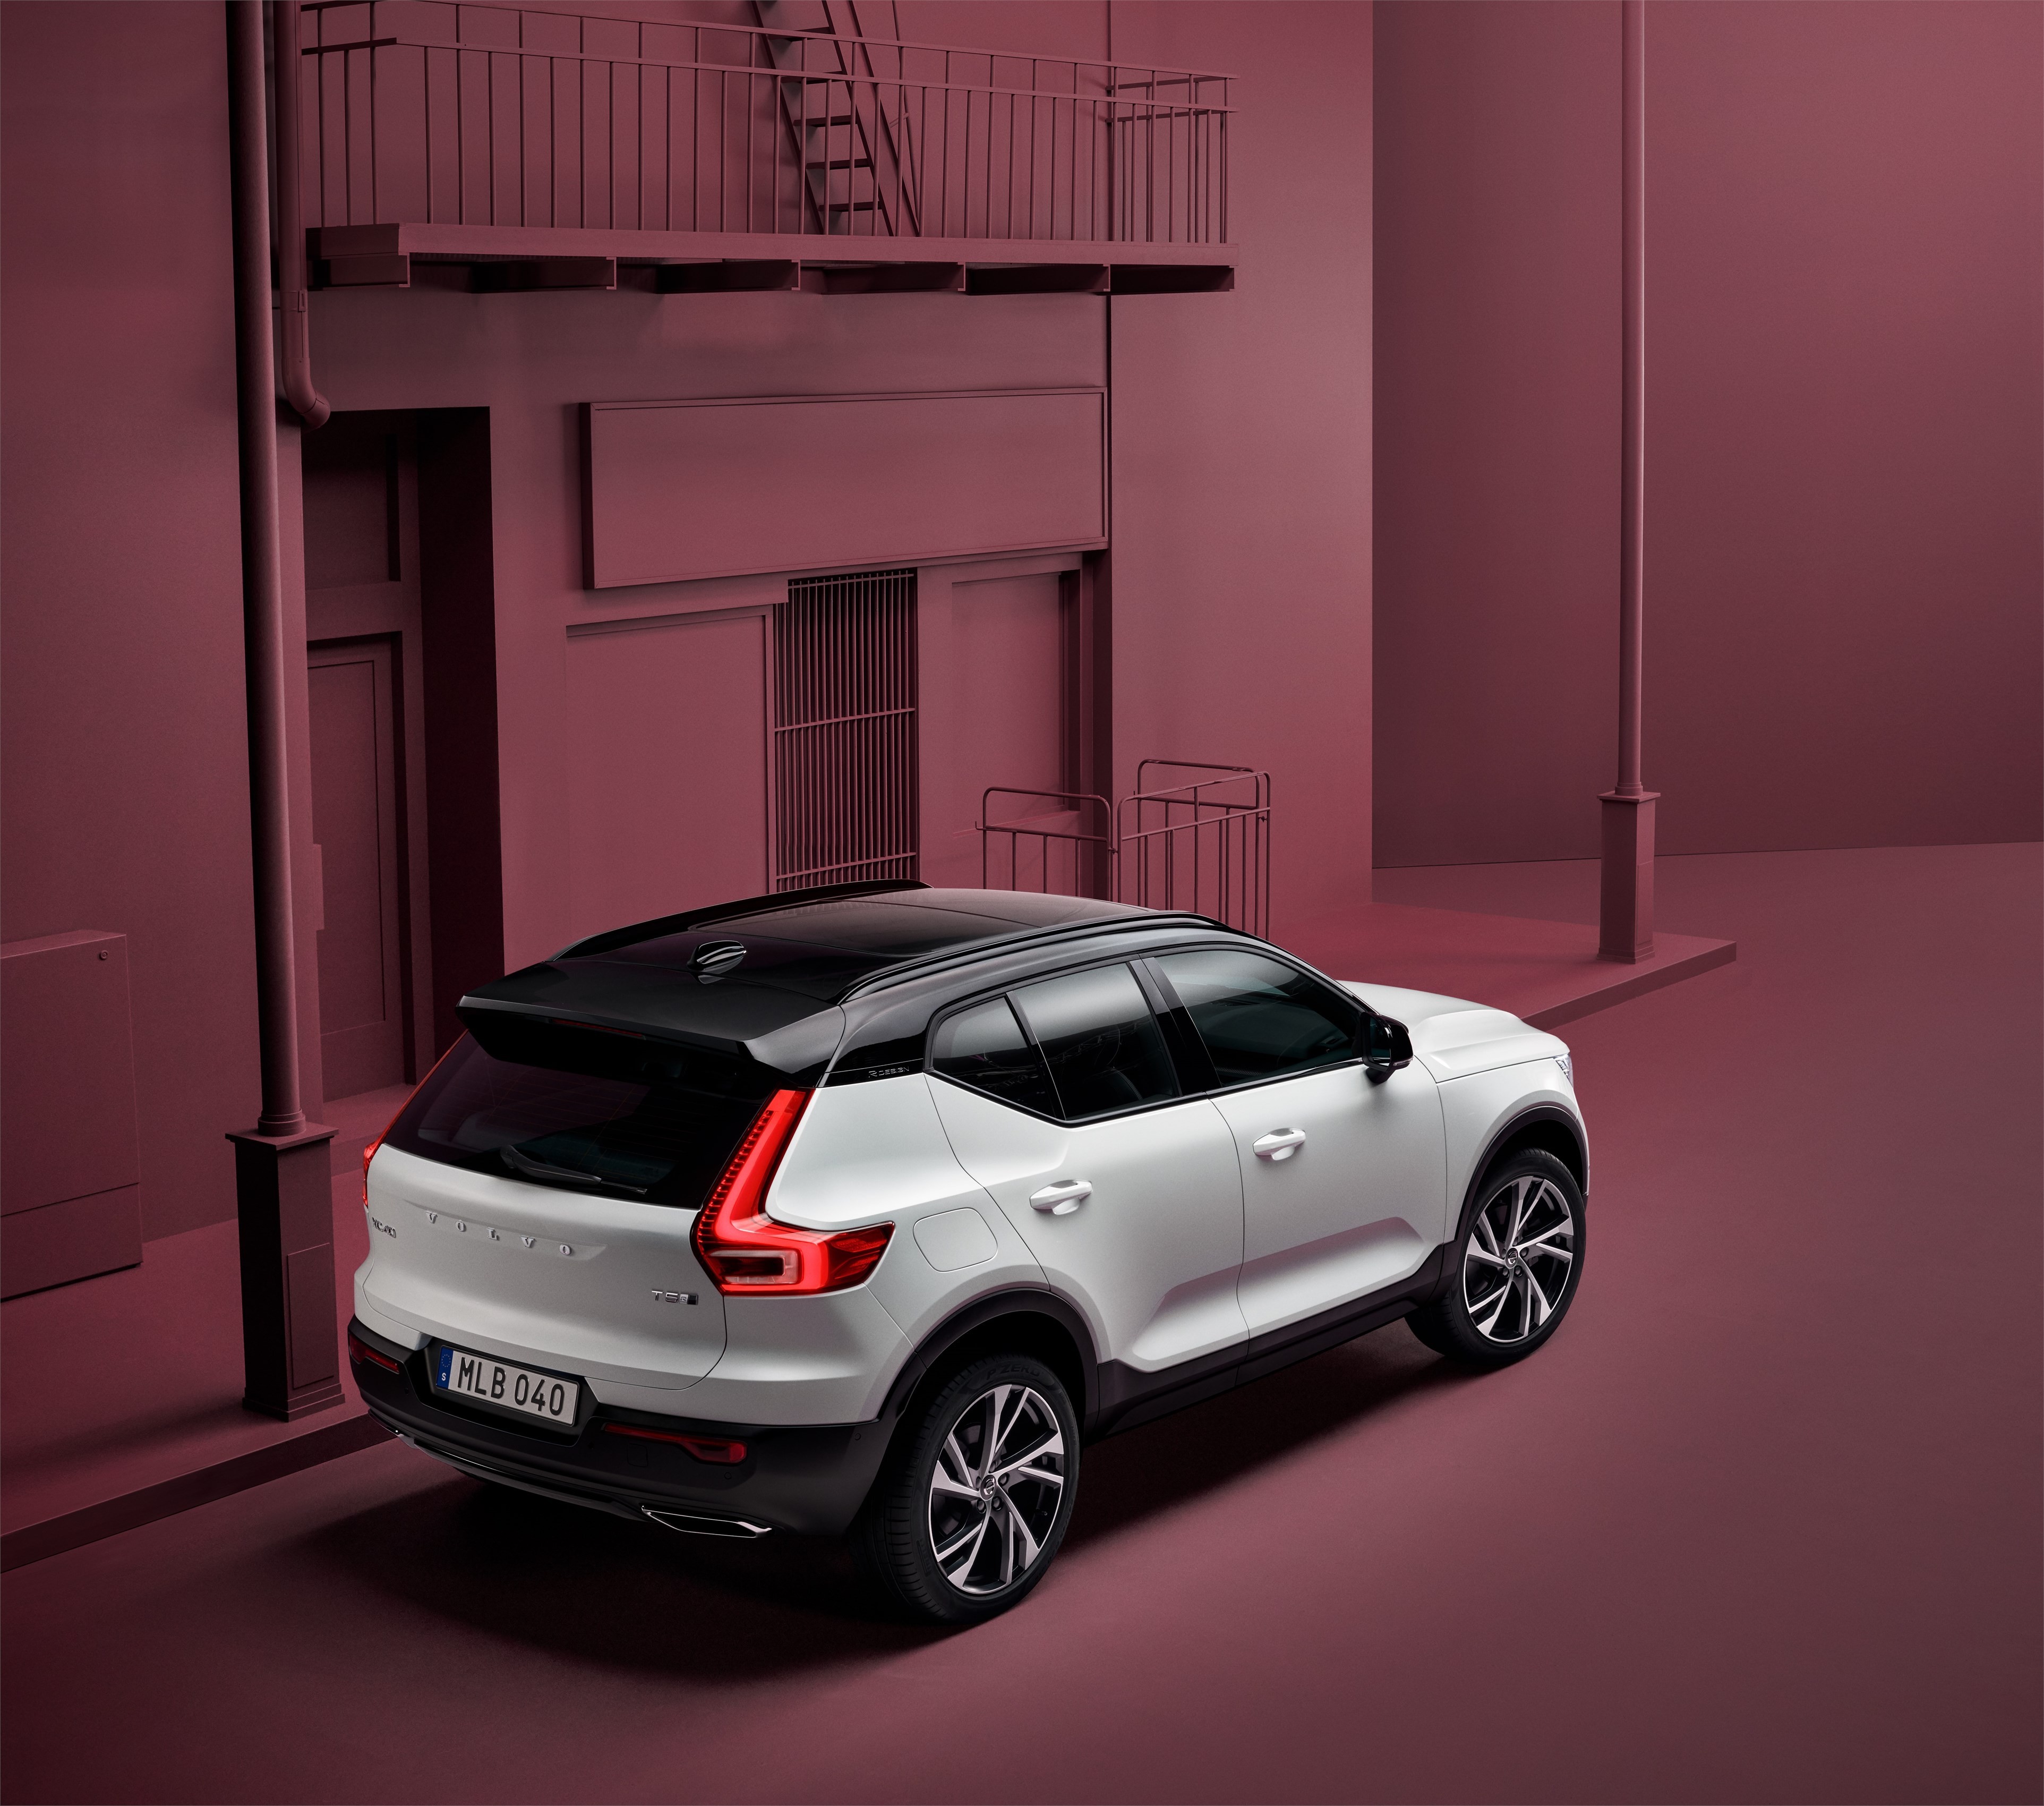 Volvo XC40 officially revealed – CMA platform, Drive-E engines, first